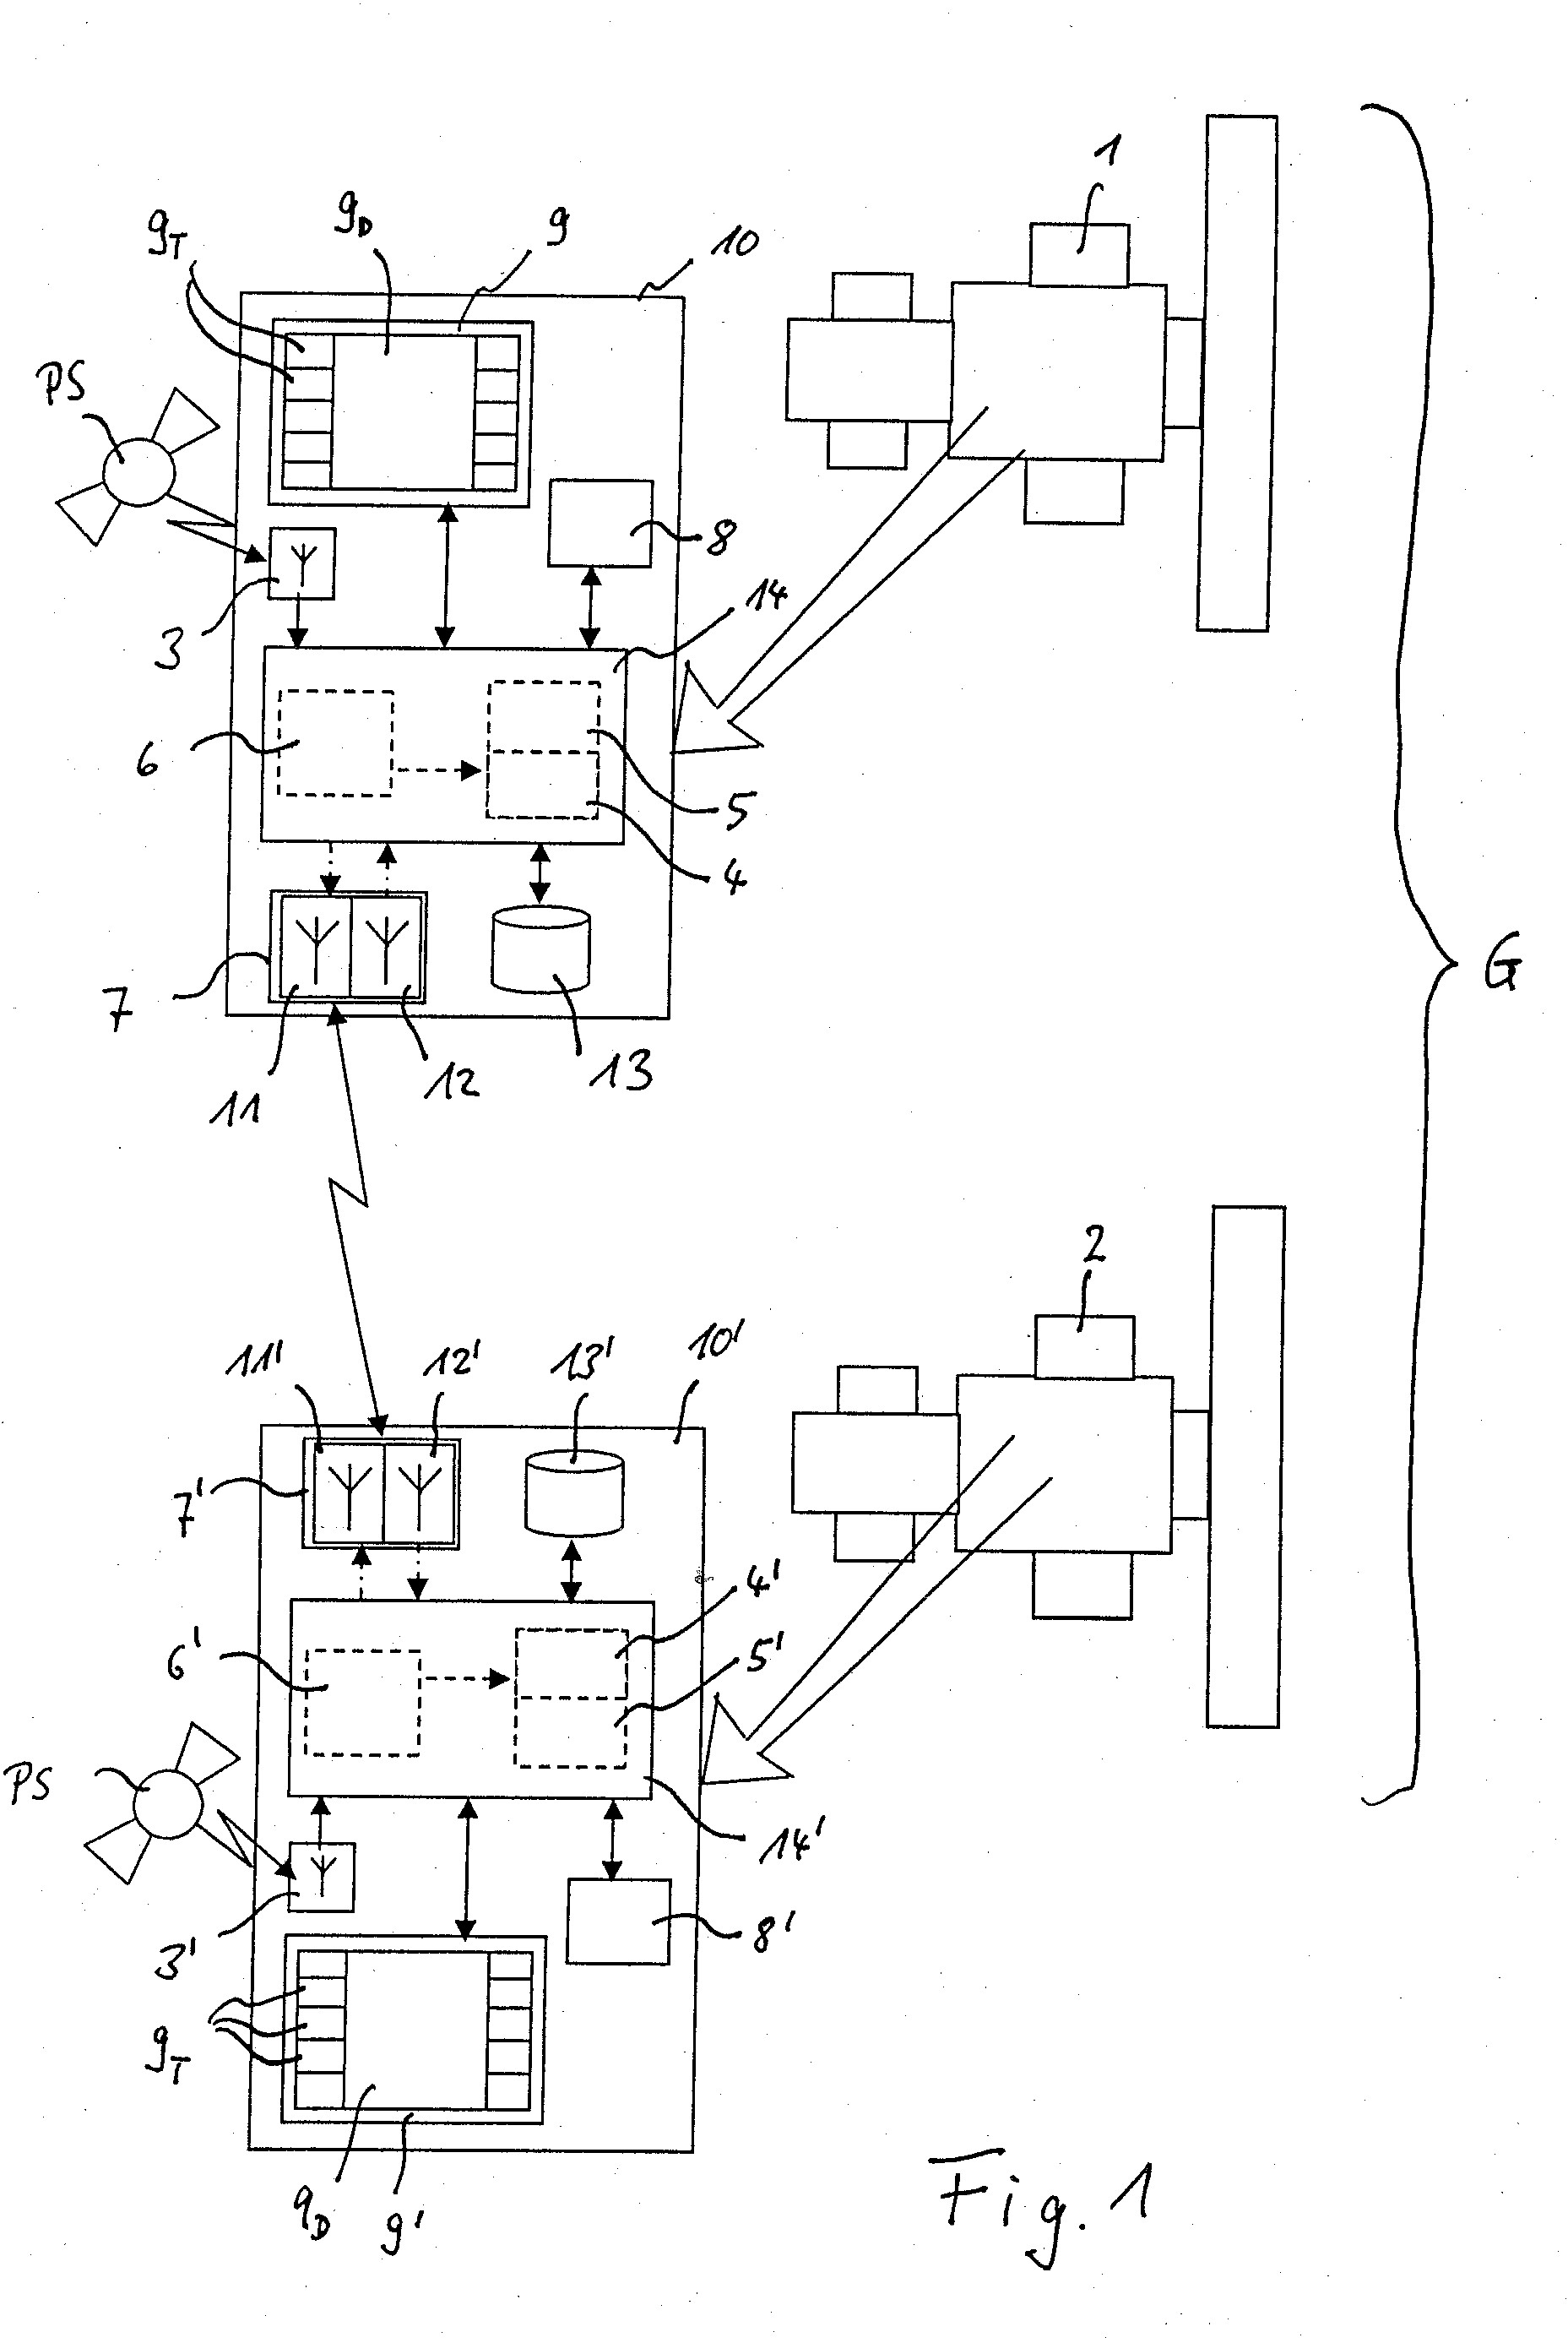 Method for creating a route plan for agricultural machine systems